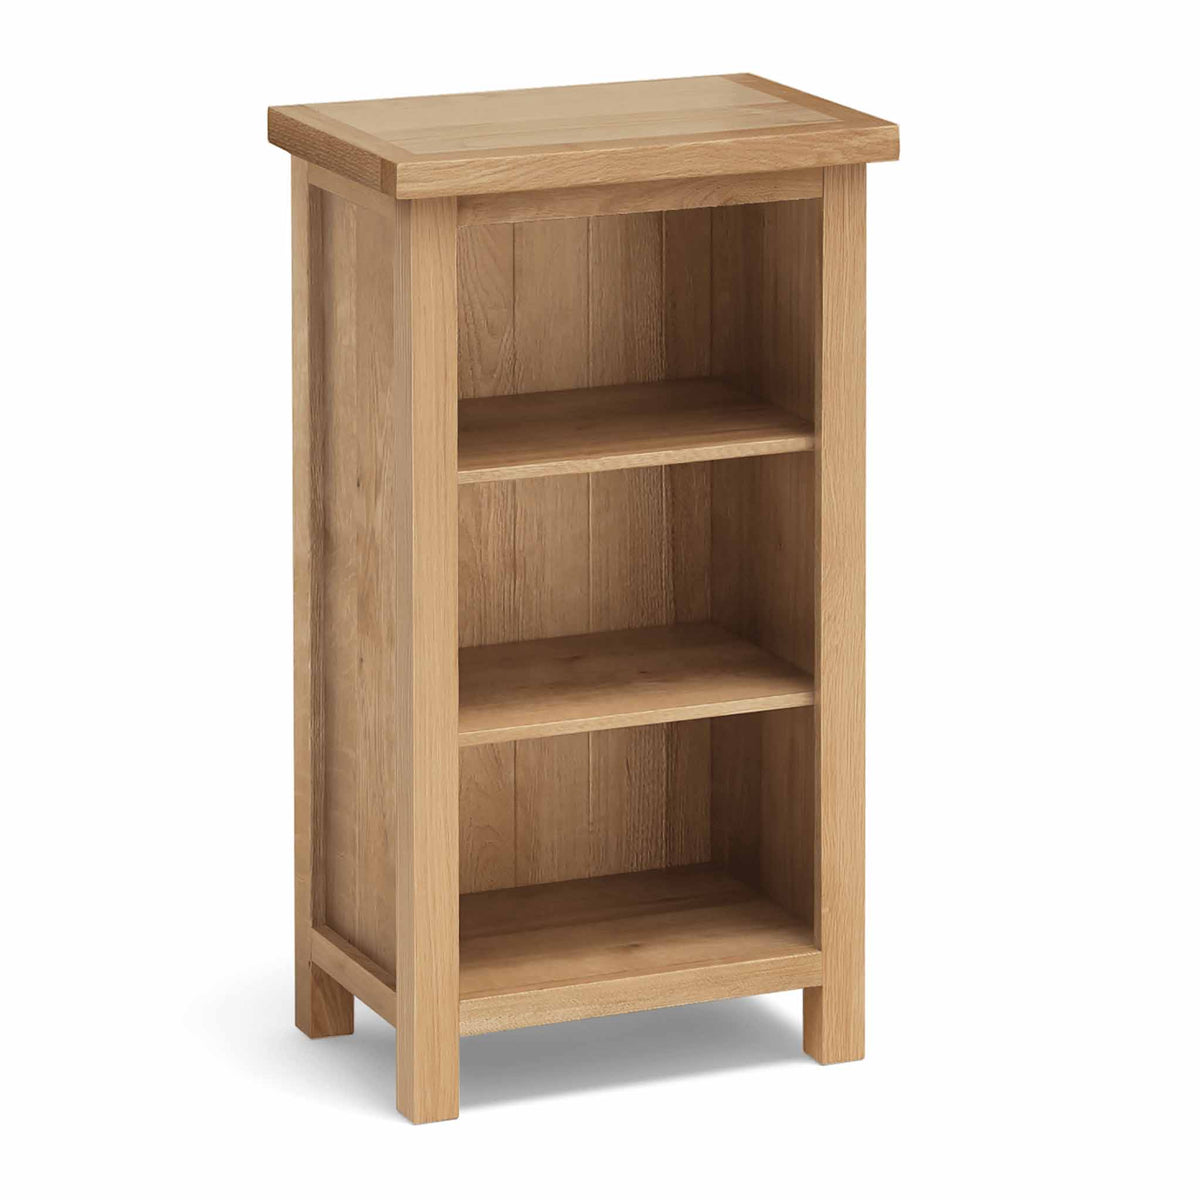 Light oak small bookcase by Roseland Furniture. 